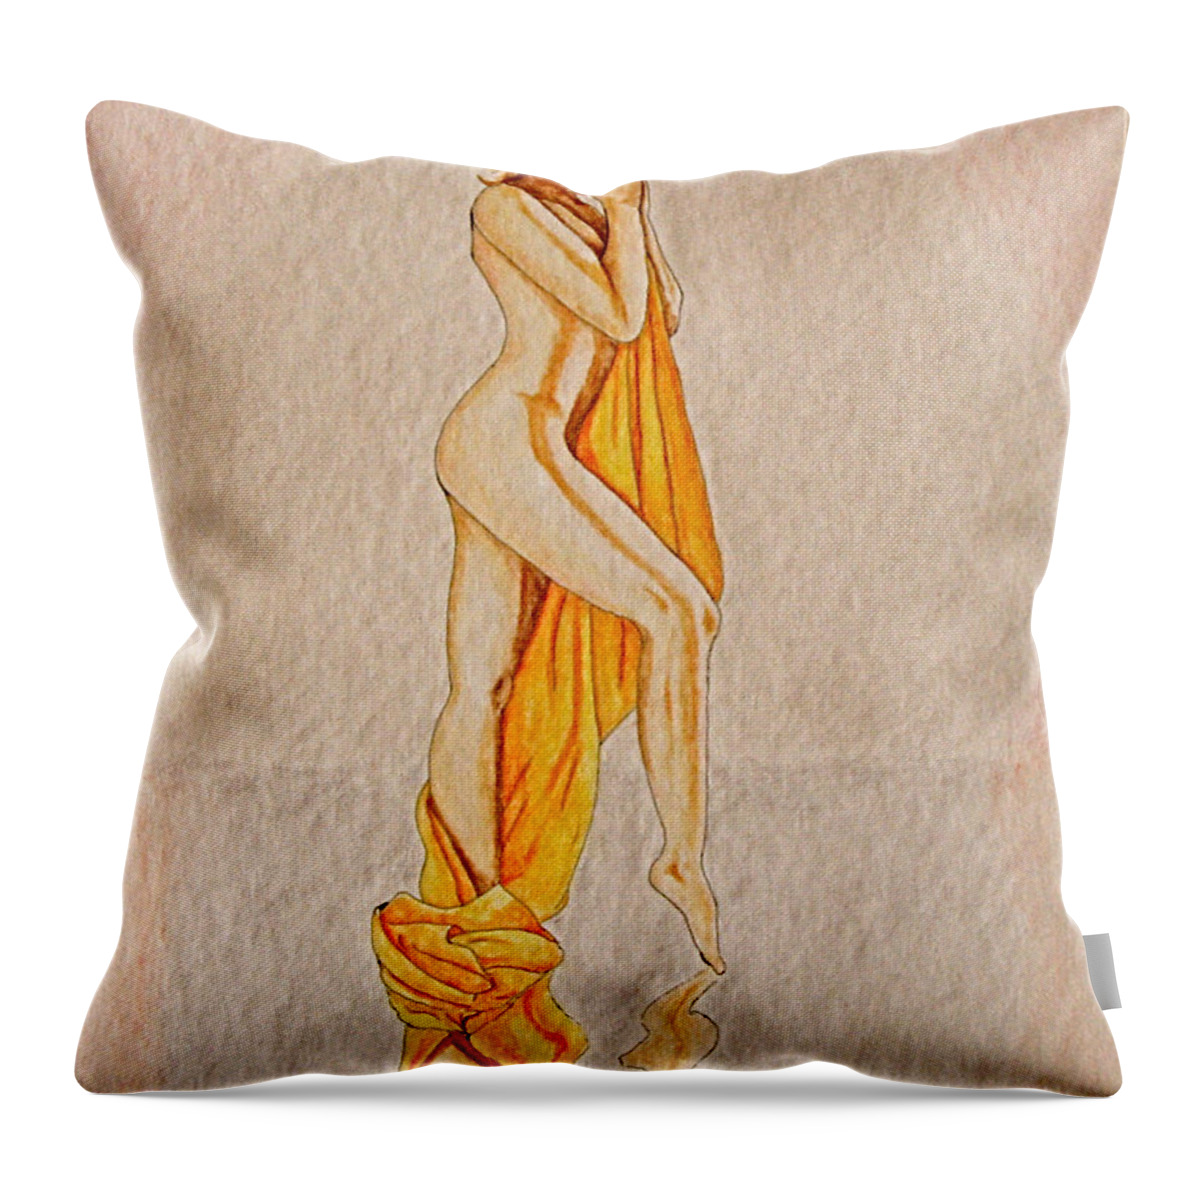 Nude Throw Pillow featuring the painting Reflection by Herschel Fall